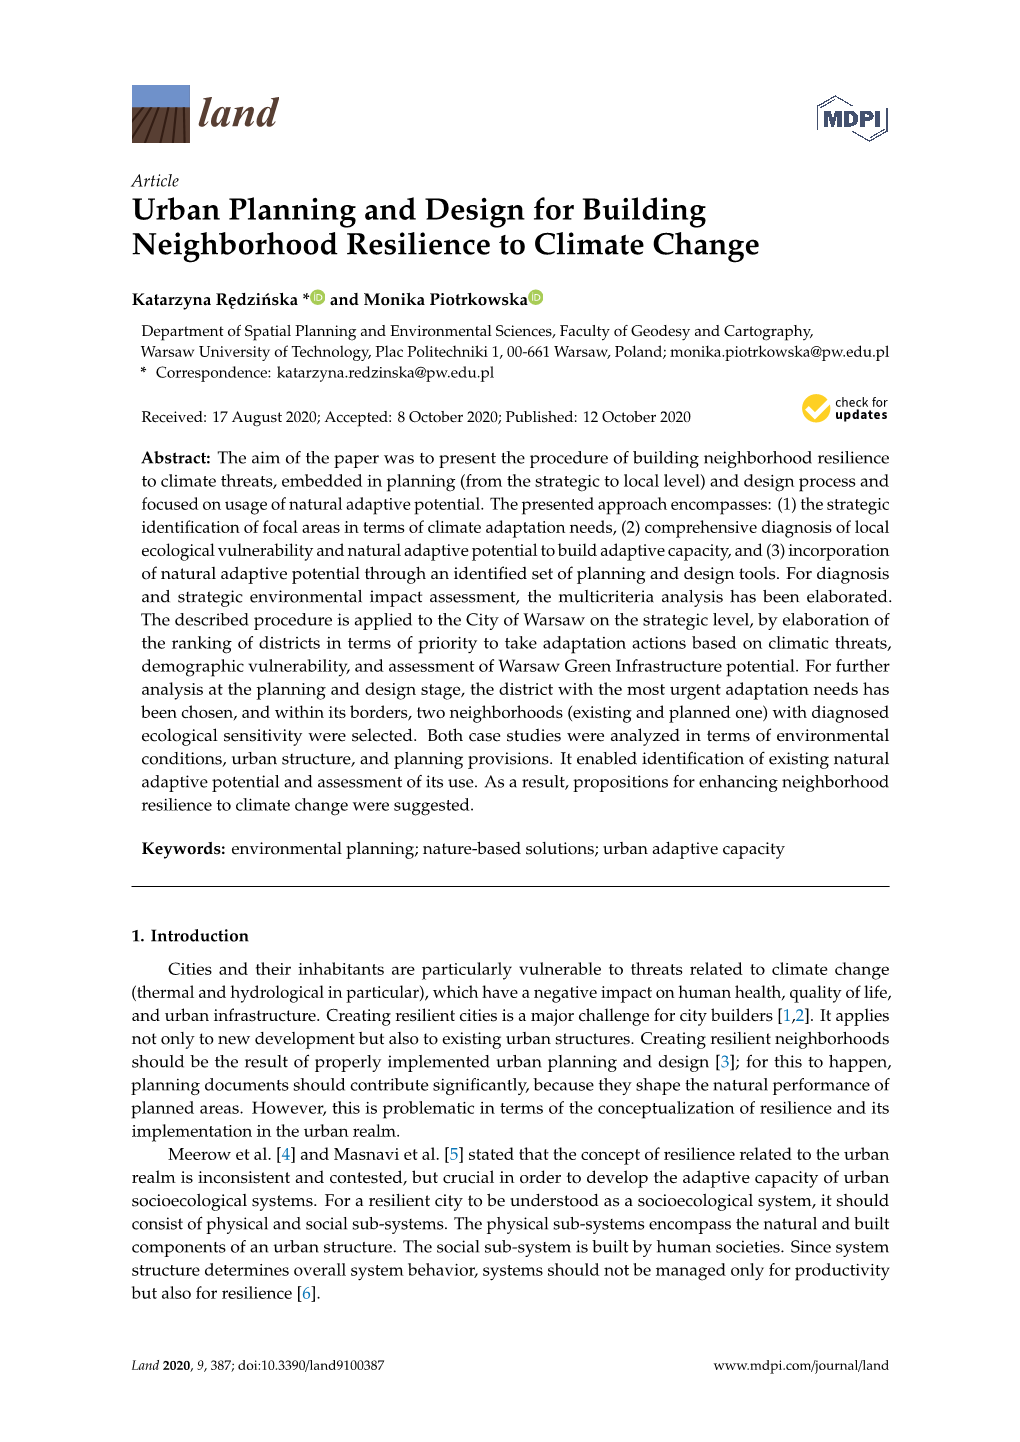 Urban Planning and Design for Building Neighborhood Resilience to Climate Change